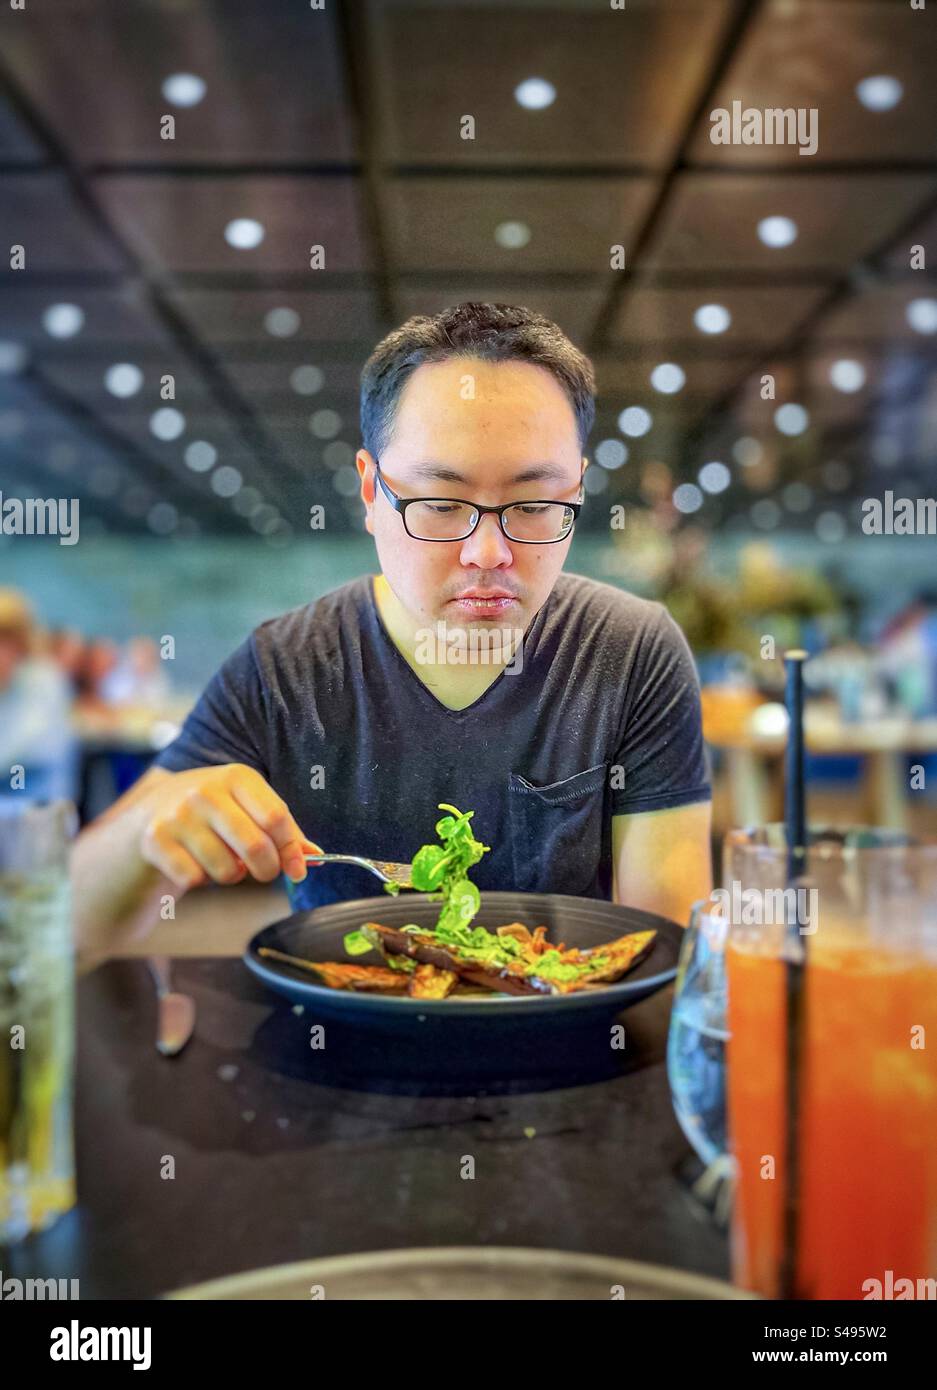 Asian man in eyeglasses enjoying a vegetarian meal of fresh salad greens and miso roasted eggplants at table in restaurant. Healthy eating. Focus on foreground. Stock Photo